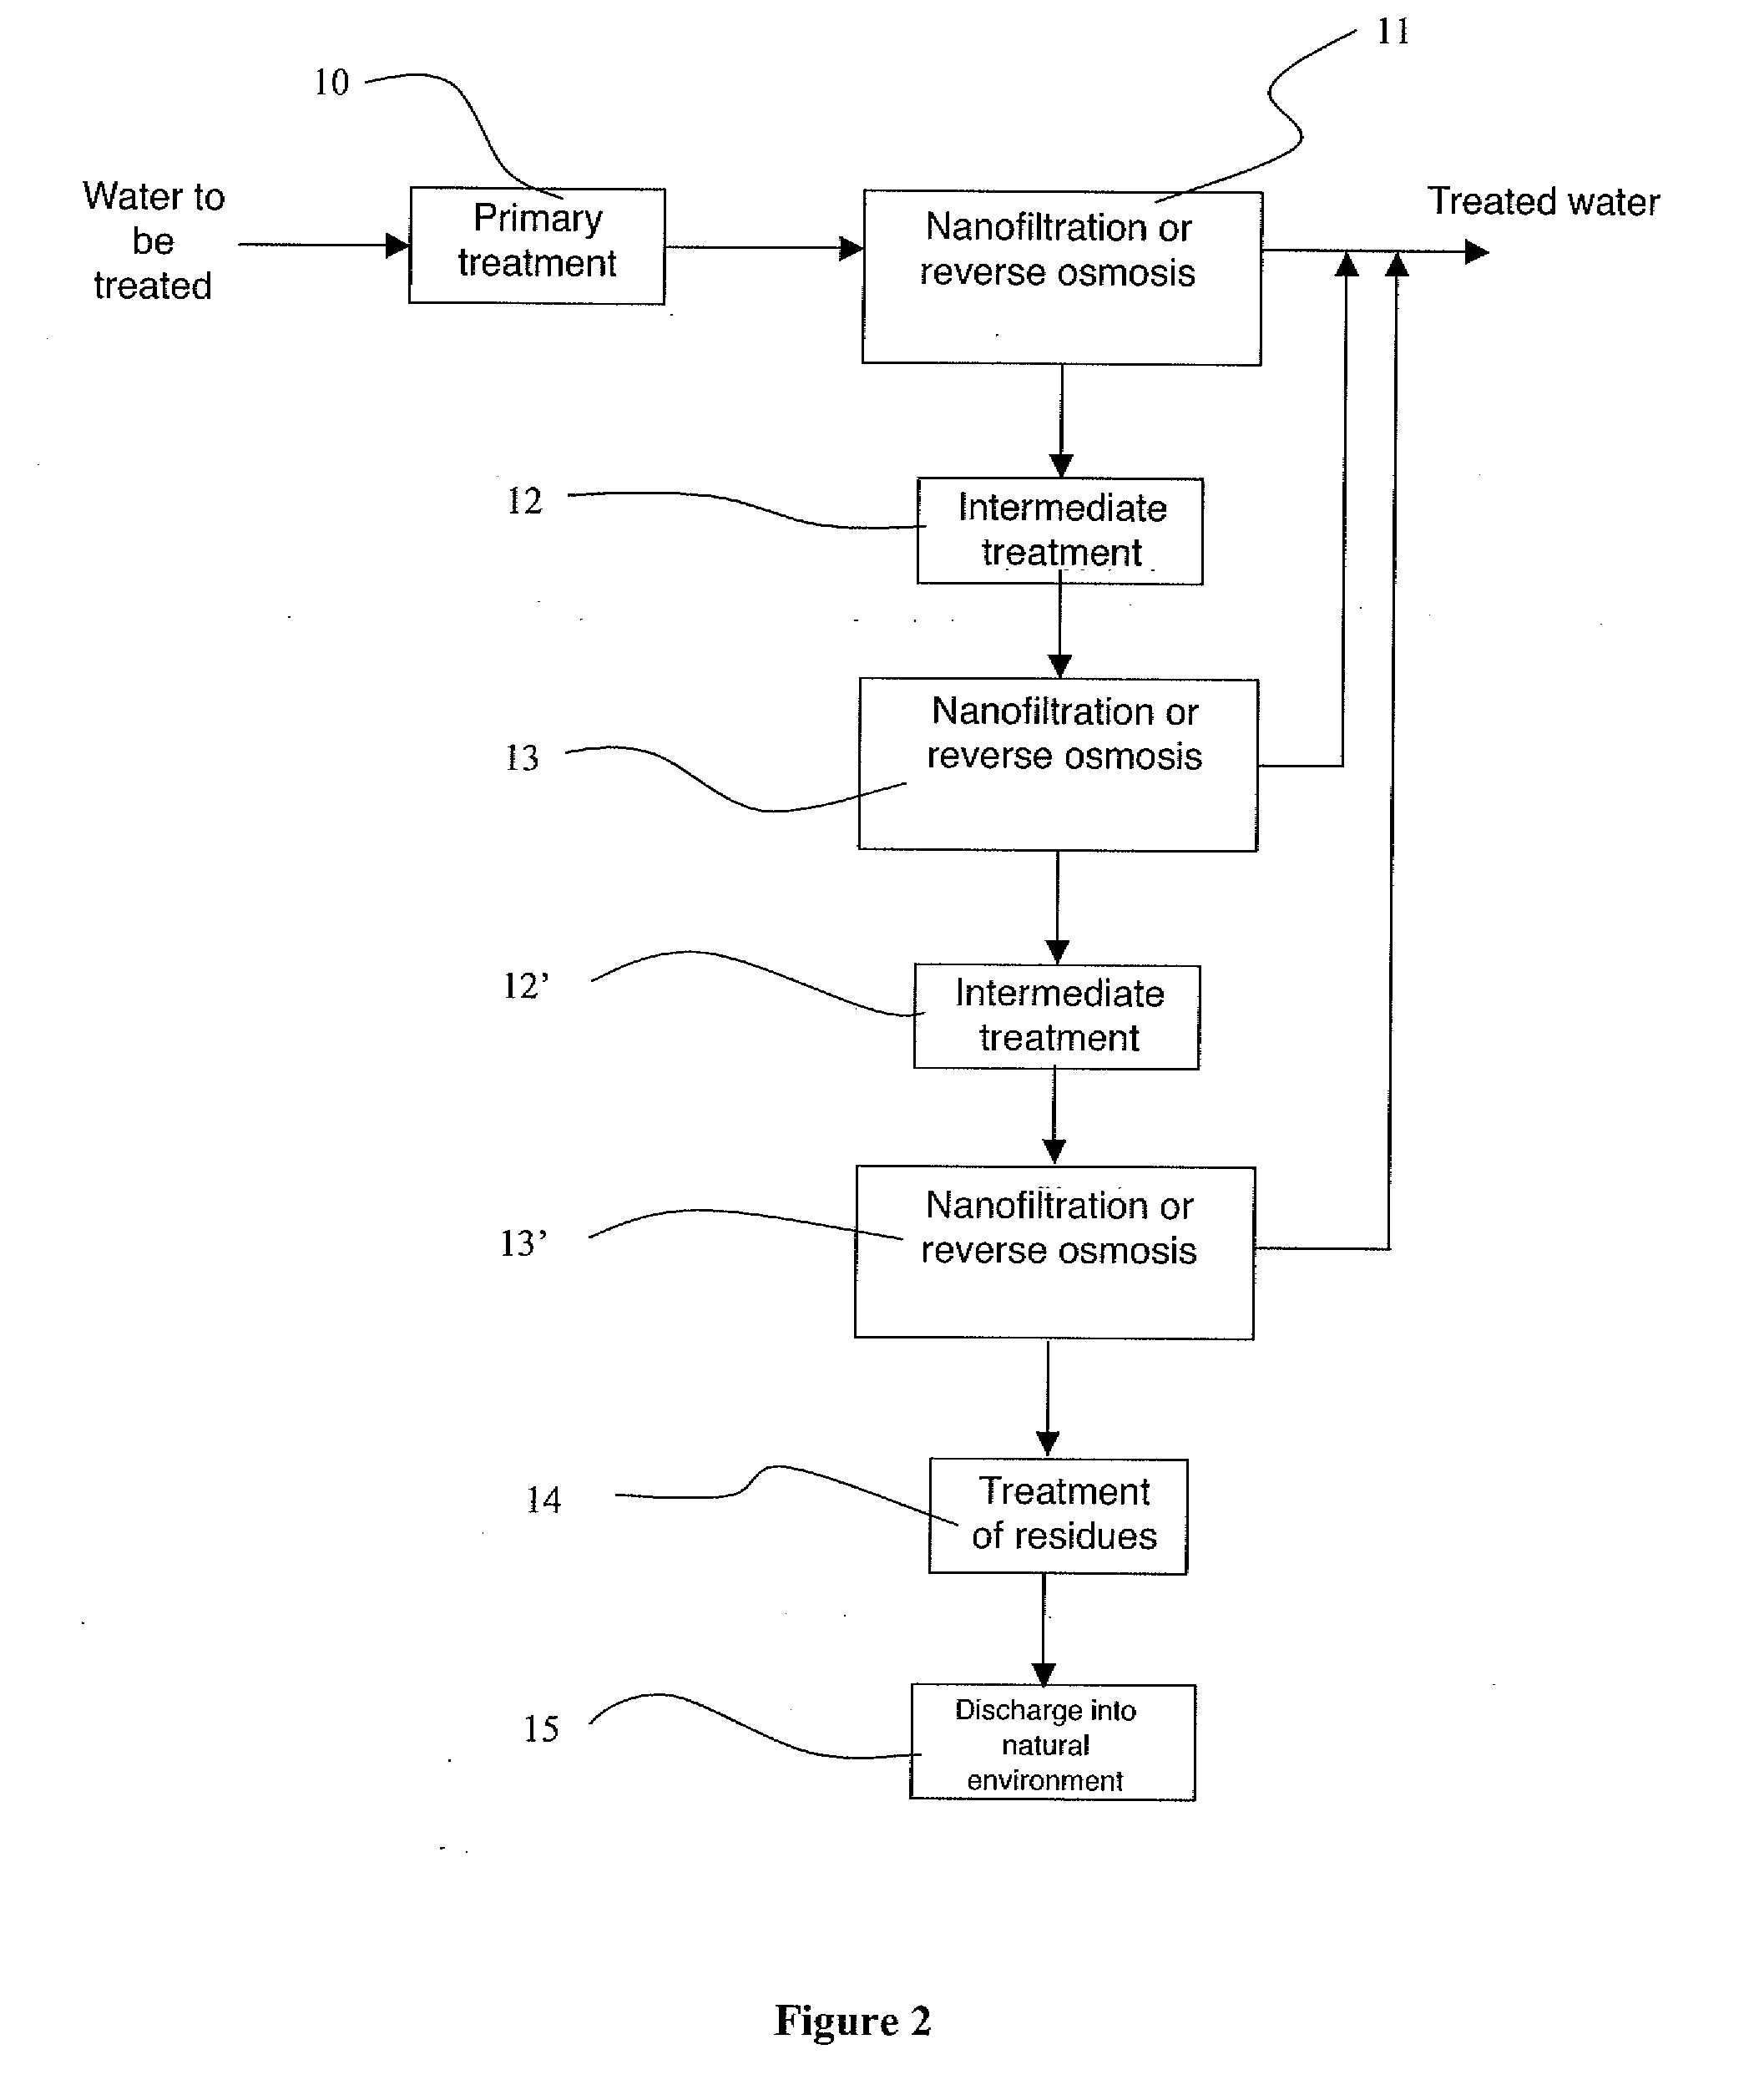 Process for treating water by a nanofiltration or reverse osmosis membrane system enabling high conversion rates due to the elimination of organic matter